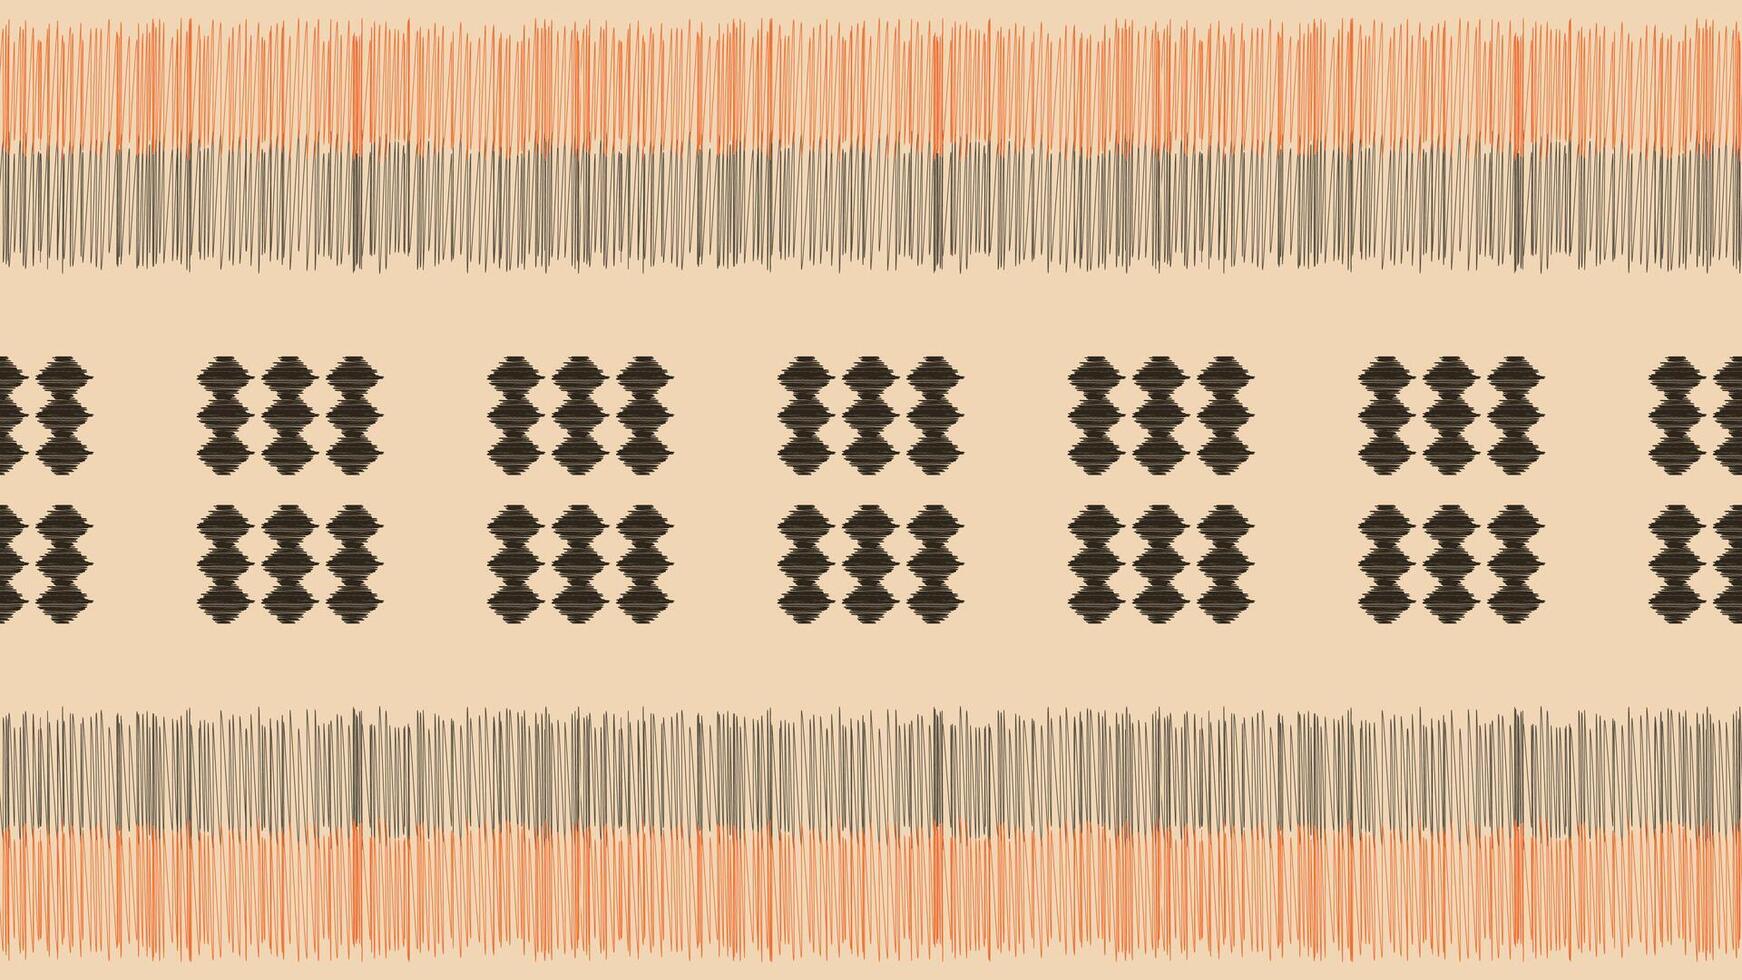 Traditional Ethnic ikat motif fabric pattern background geometric .African Ikat embroidery Ethnic pattern brown cream background wallpaper. Abstract,vector,illustration.Texture,frame,decoration. vector